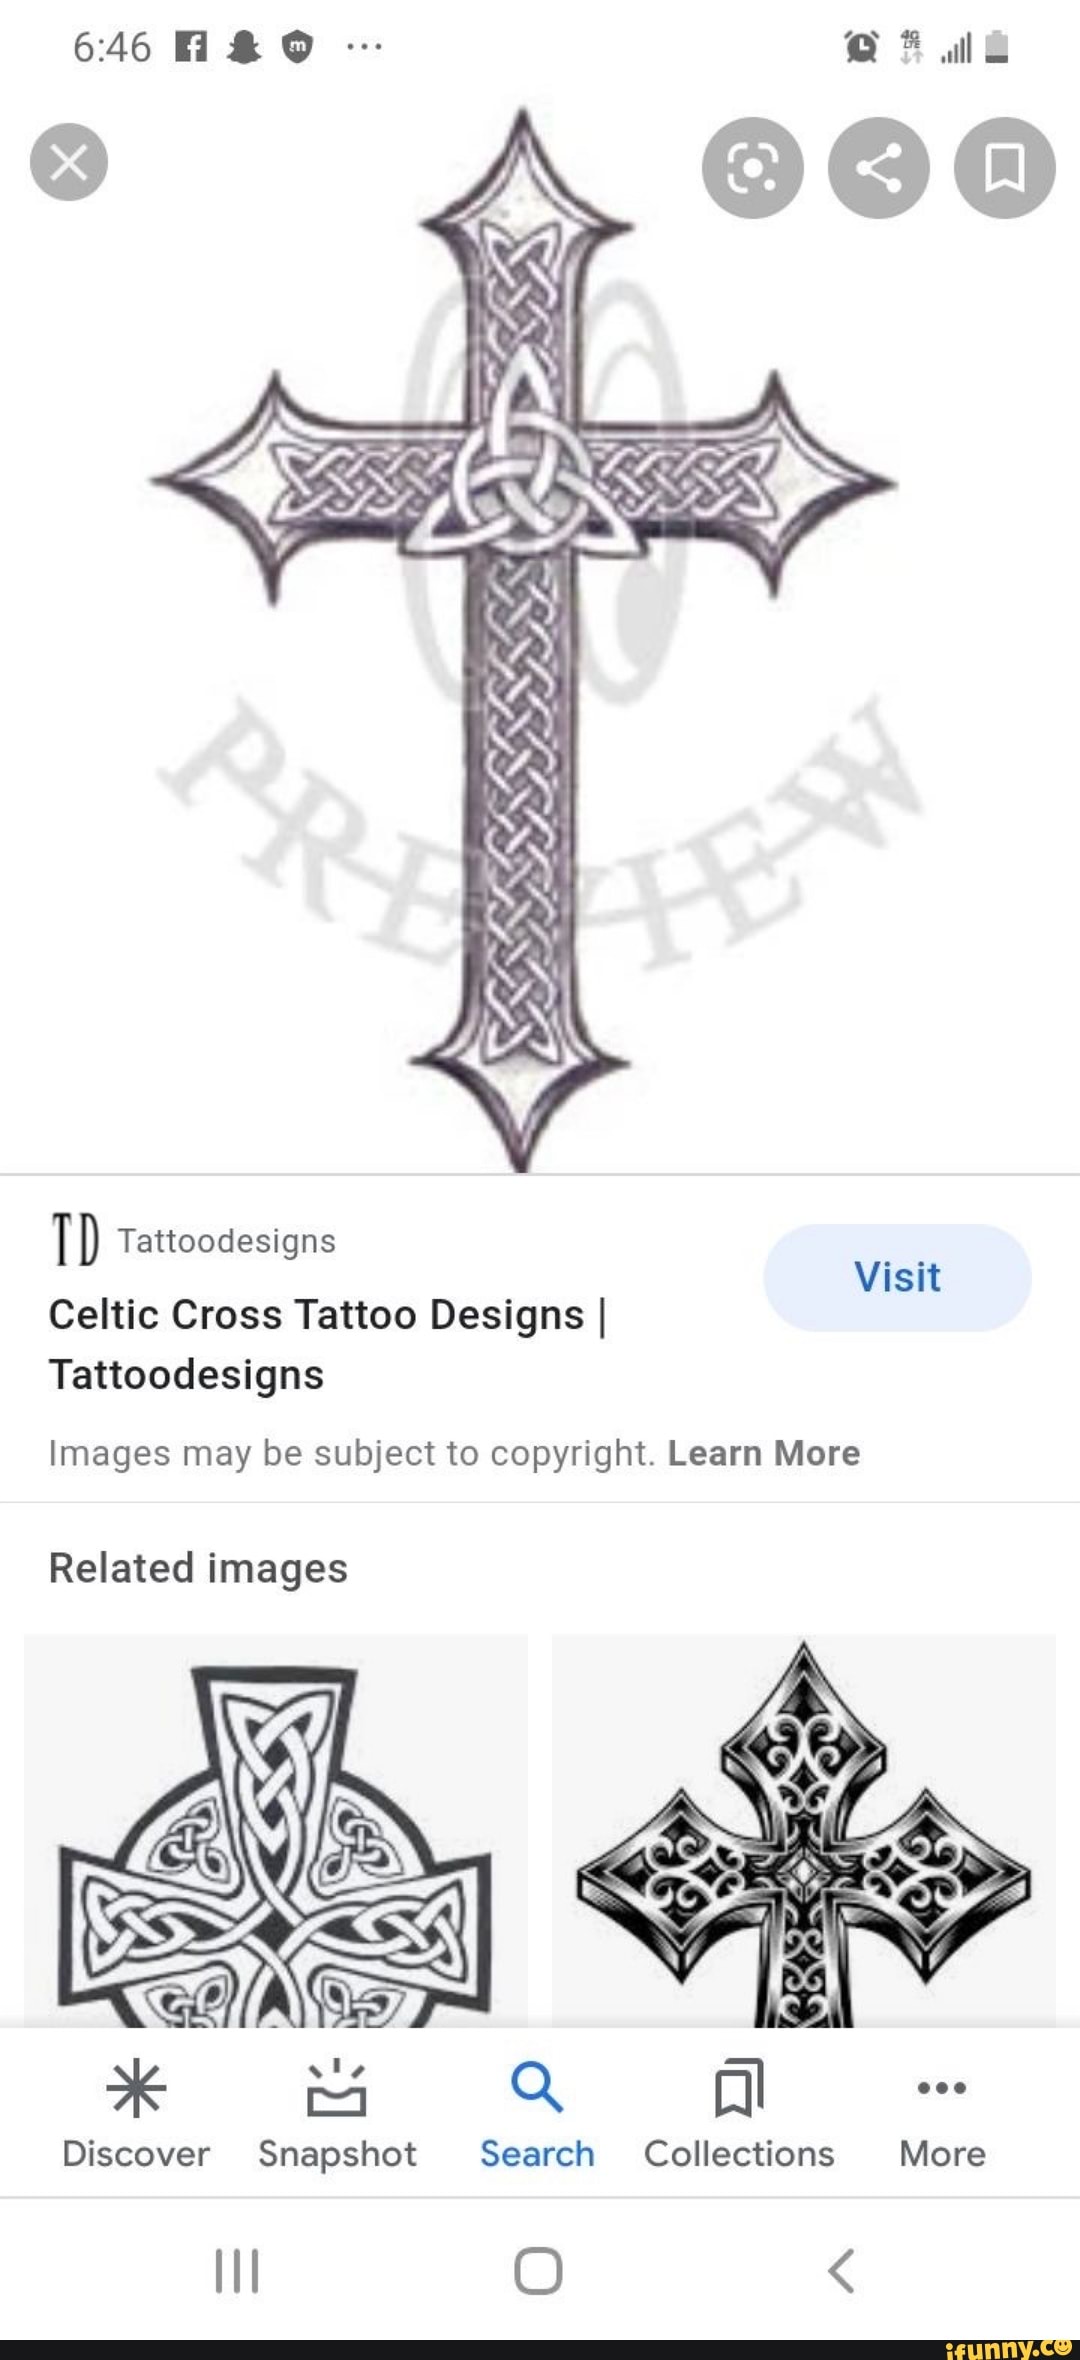 Scottish Tattoo Vector Images over 610